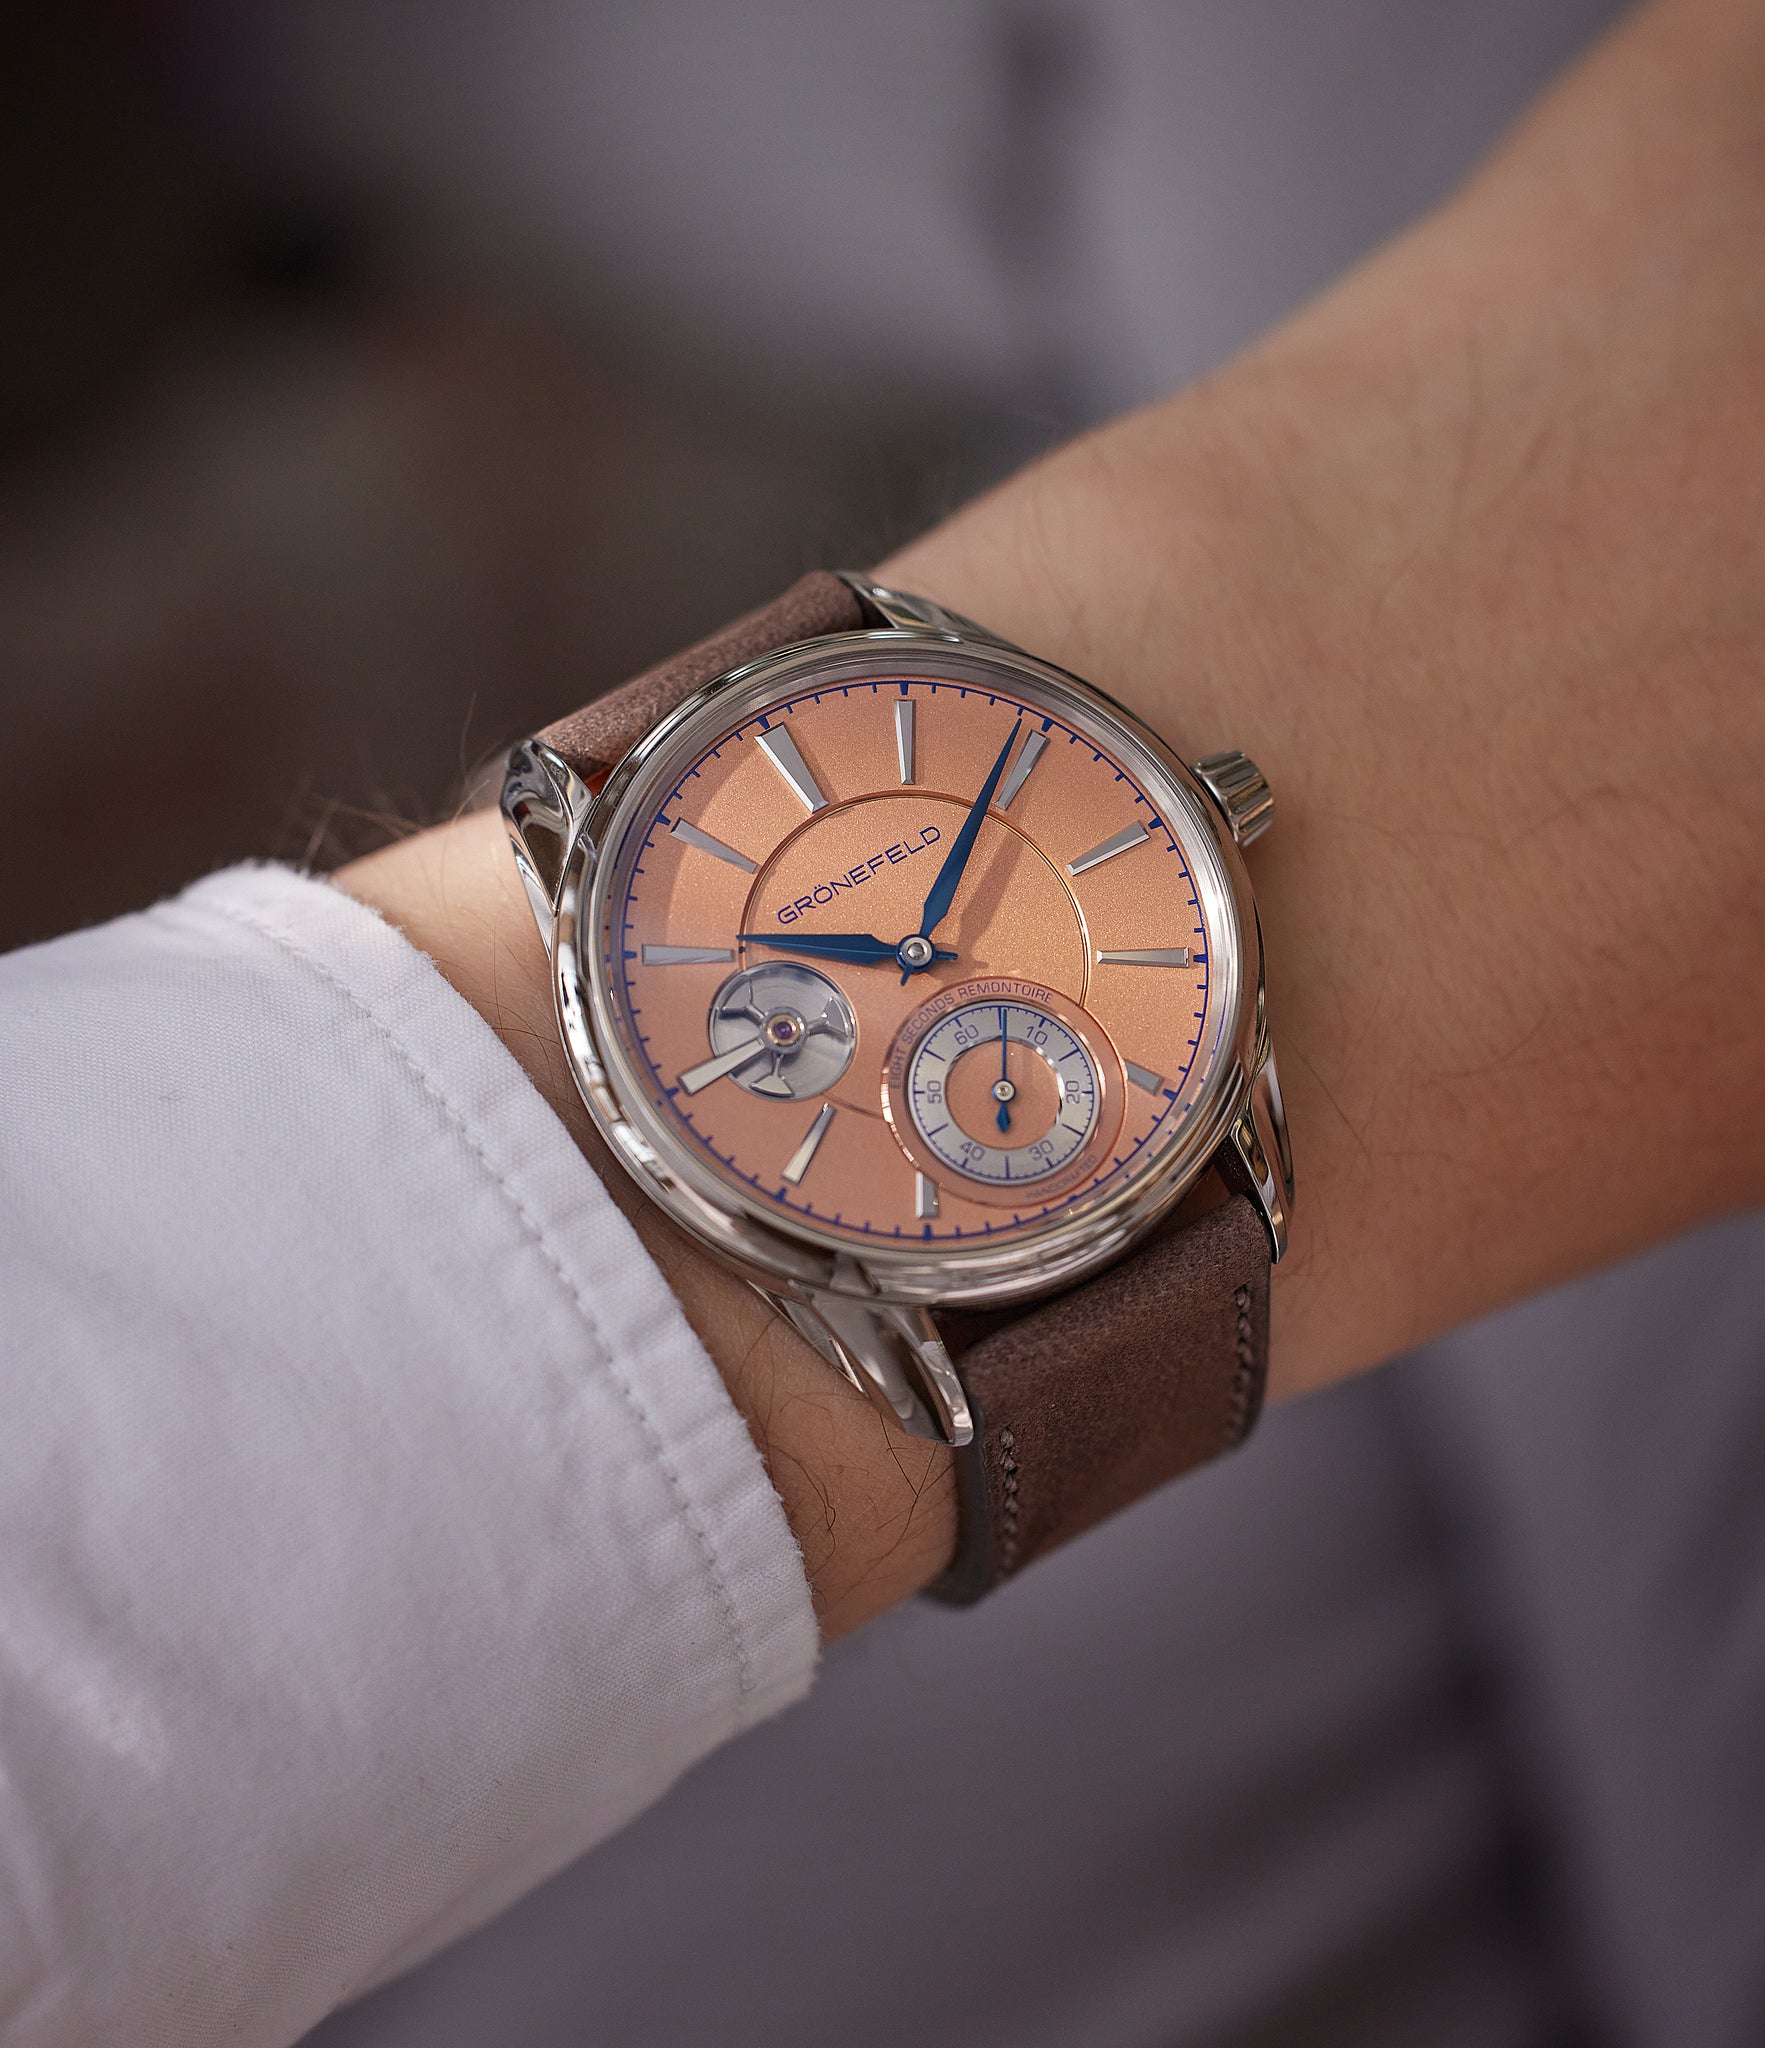 Gronefeld 1941 Remontoire | Salmon Dial | White Gold A Collected Man London | Available Worldwide 